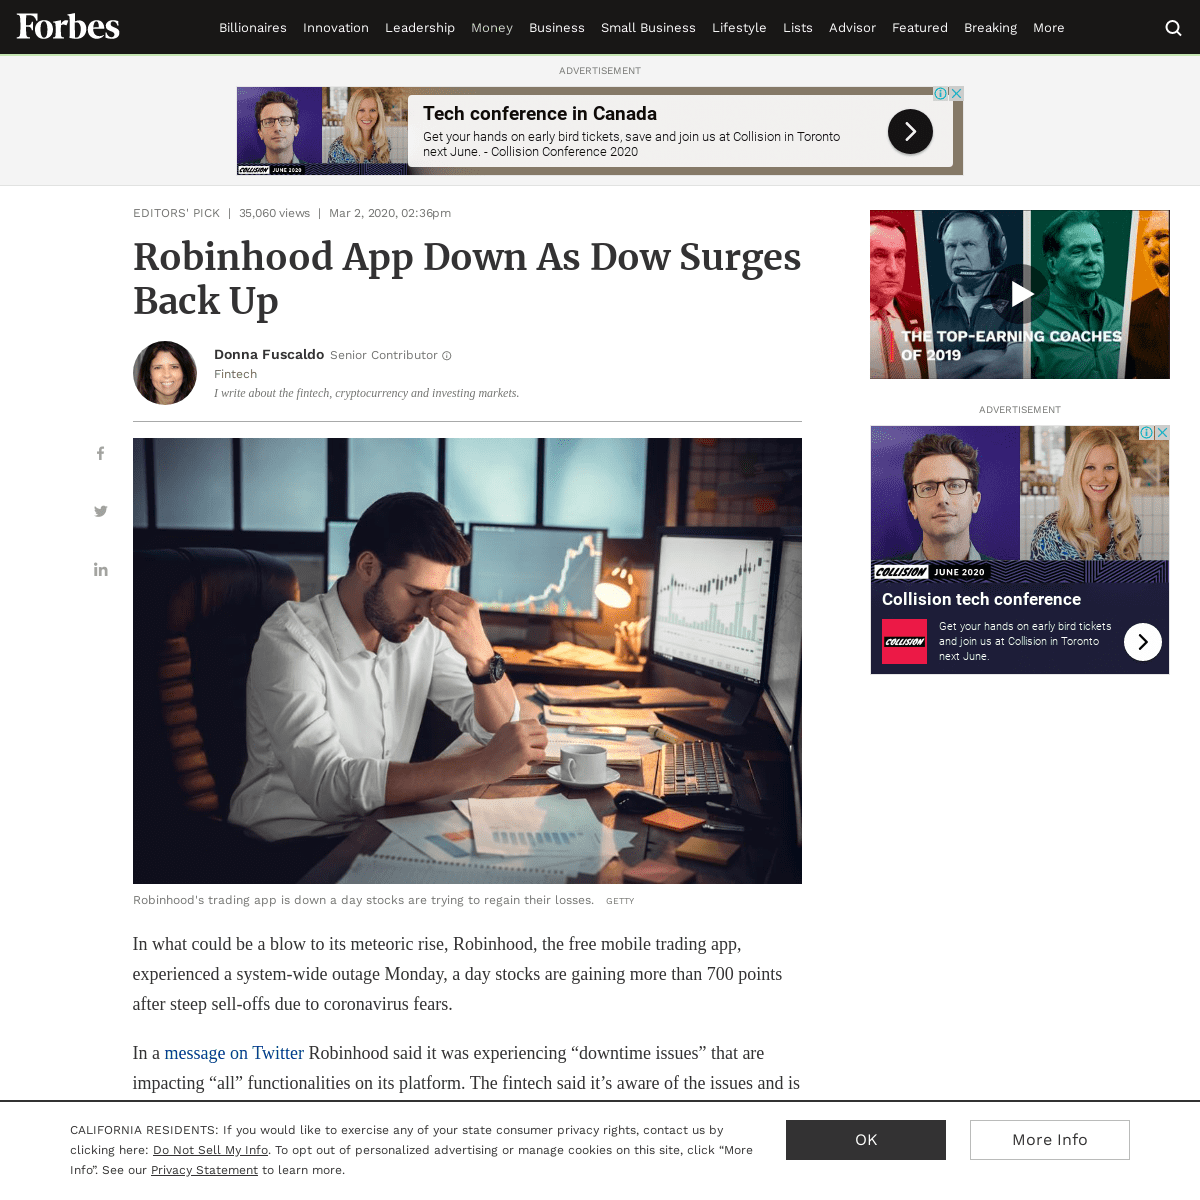 A complete backup of www.forbes.com/sites/donnafuscaldo/2020/03/02/robinhood-app-down-as-dow-surges-back-up/